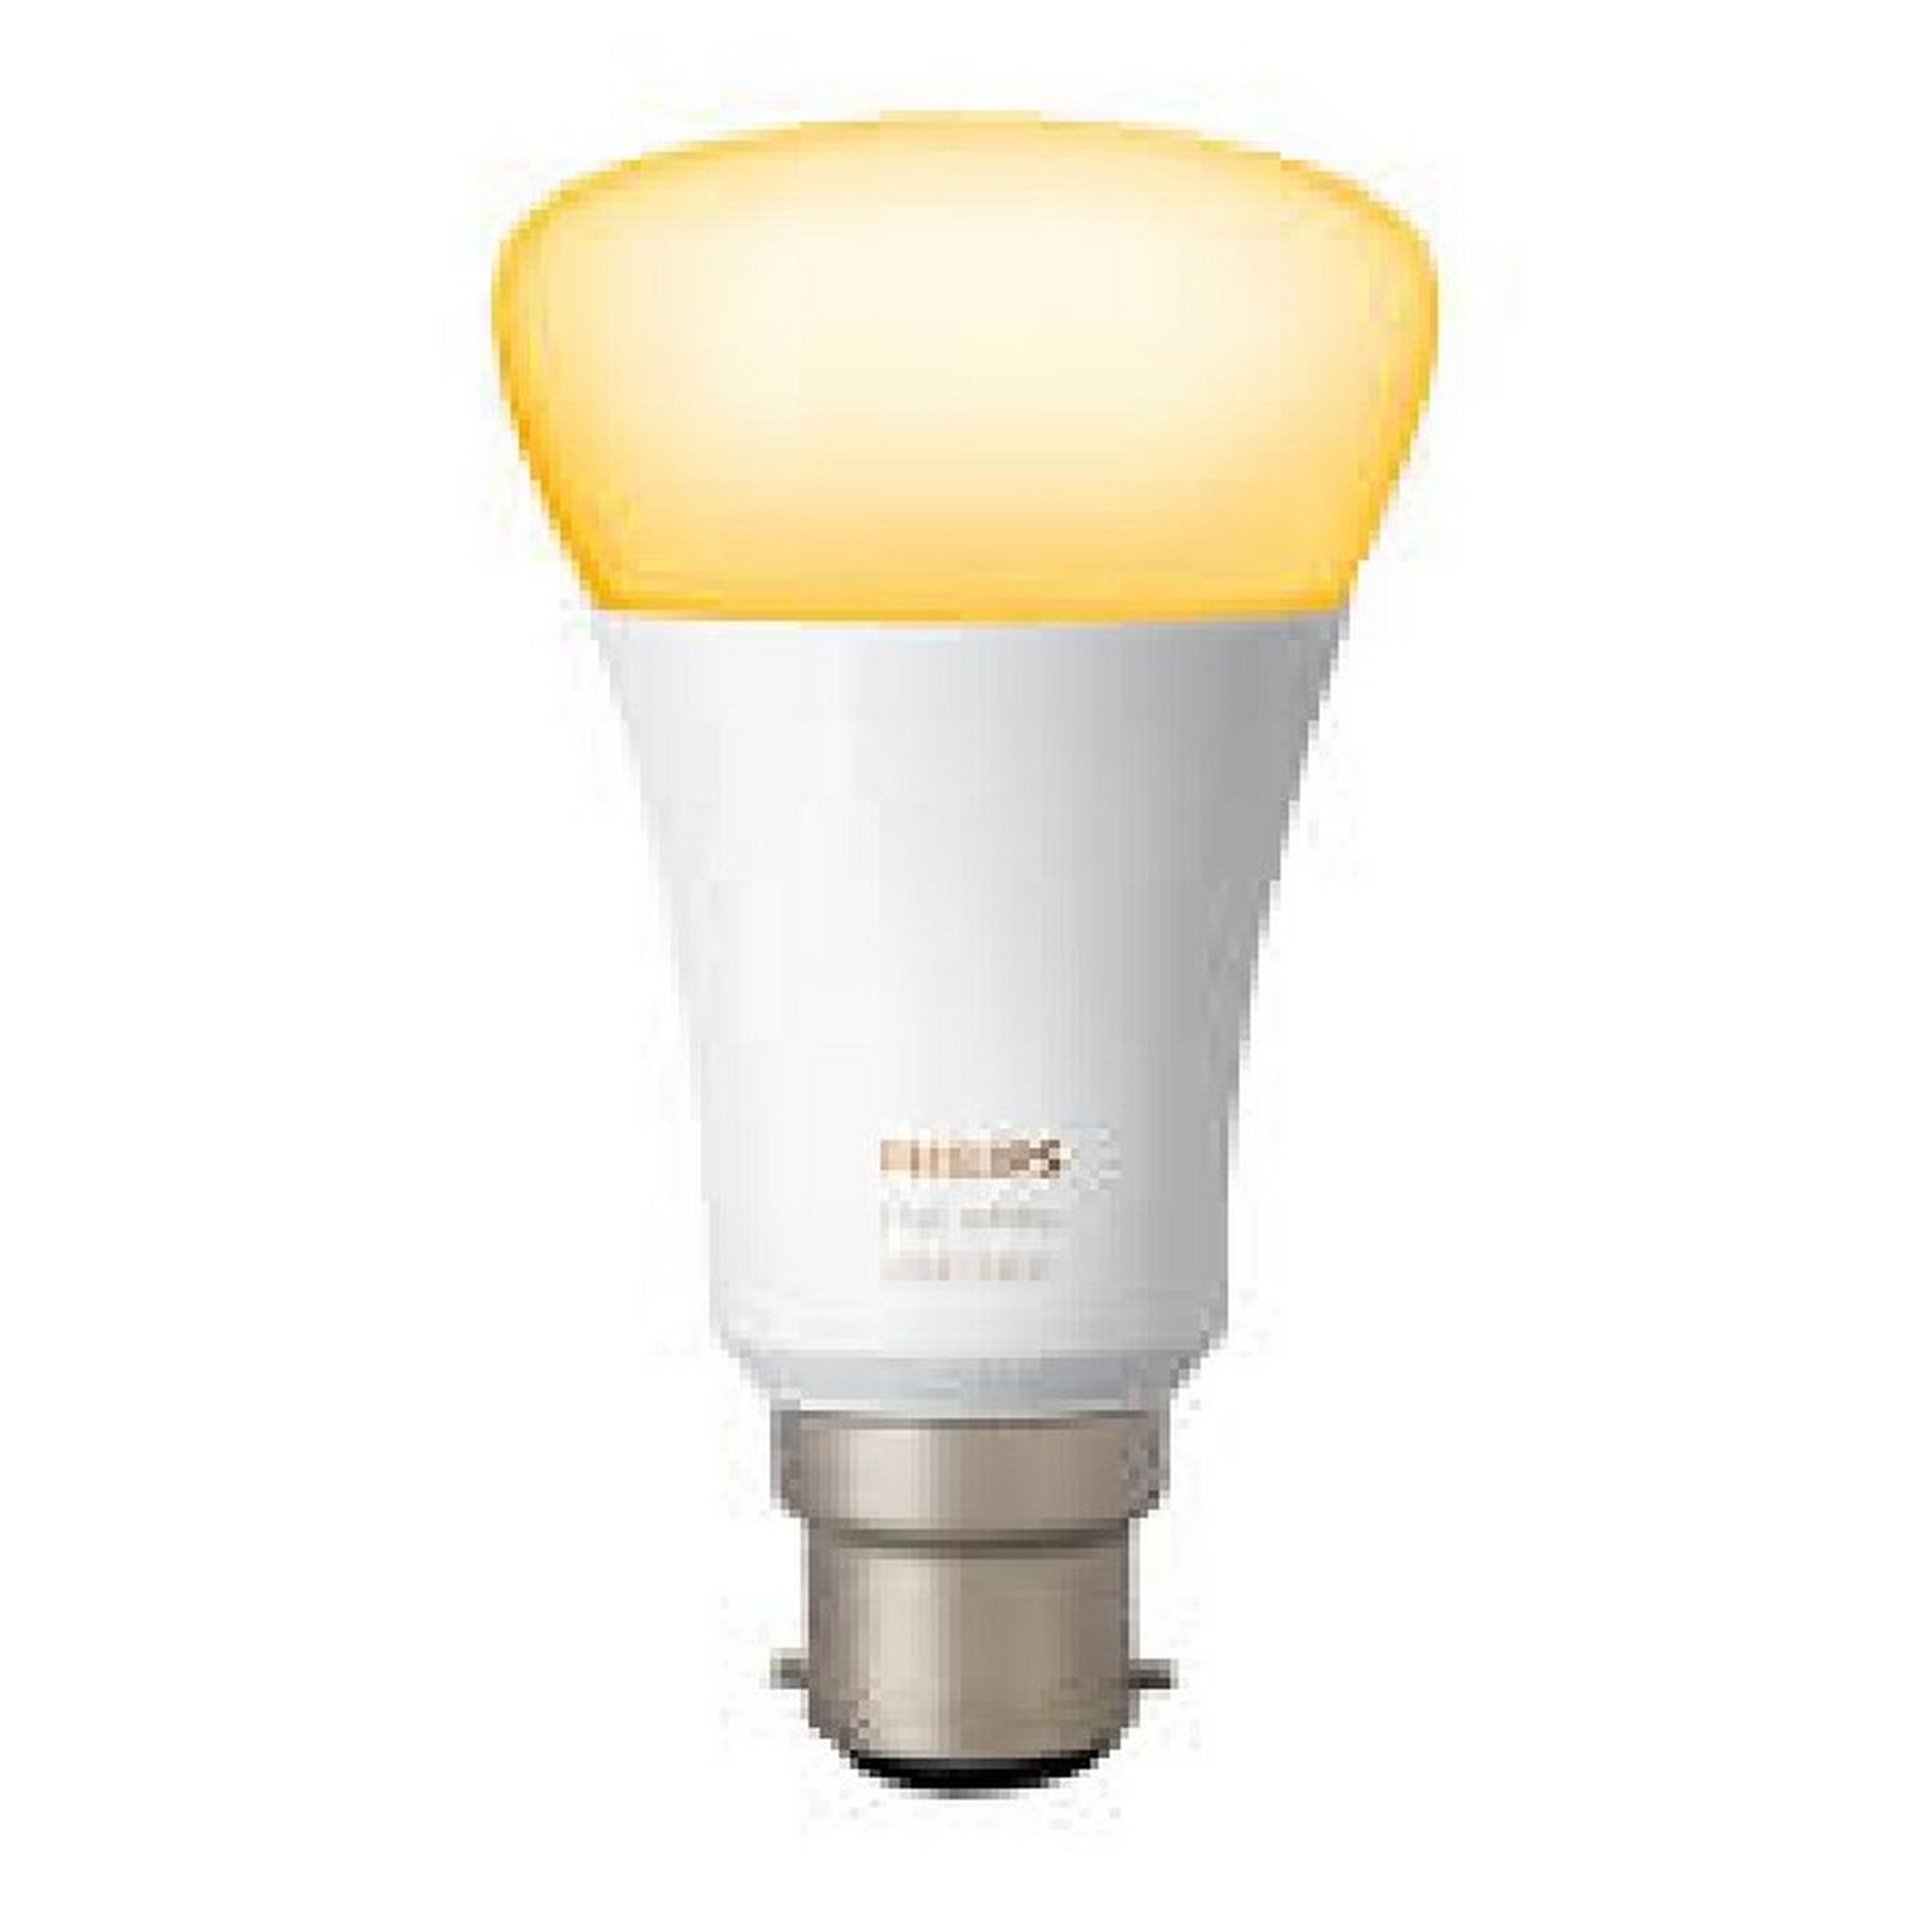 Philips Hue Twin Pack White + Colored Bulb